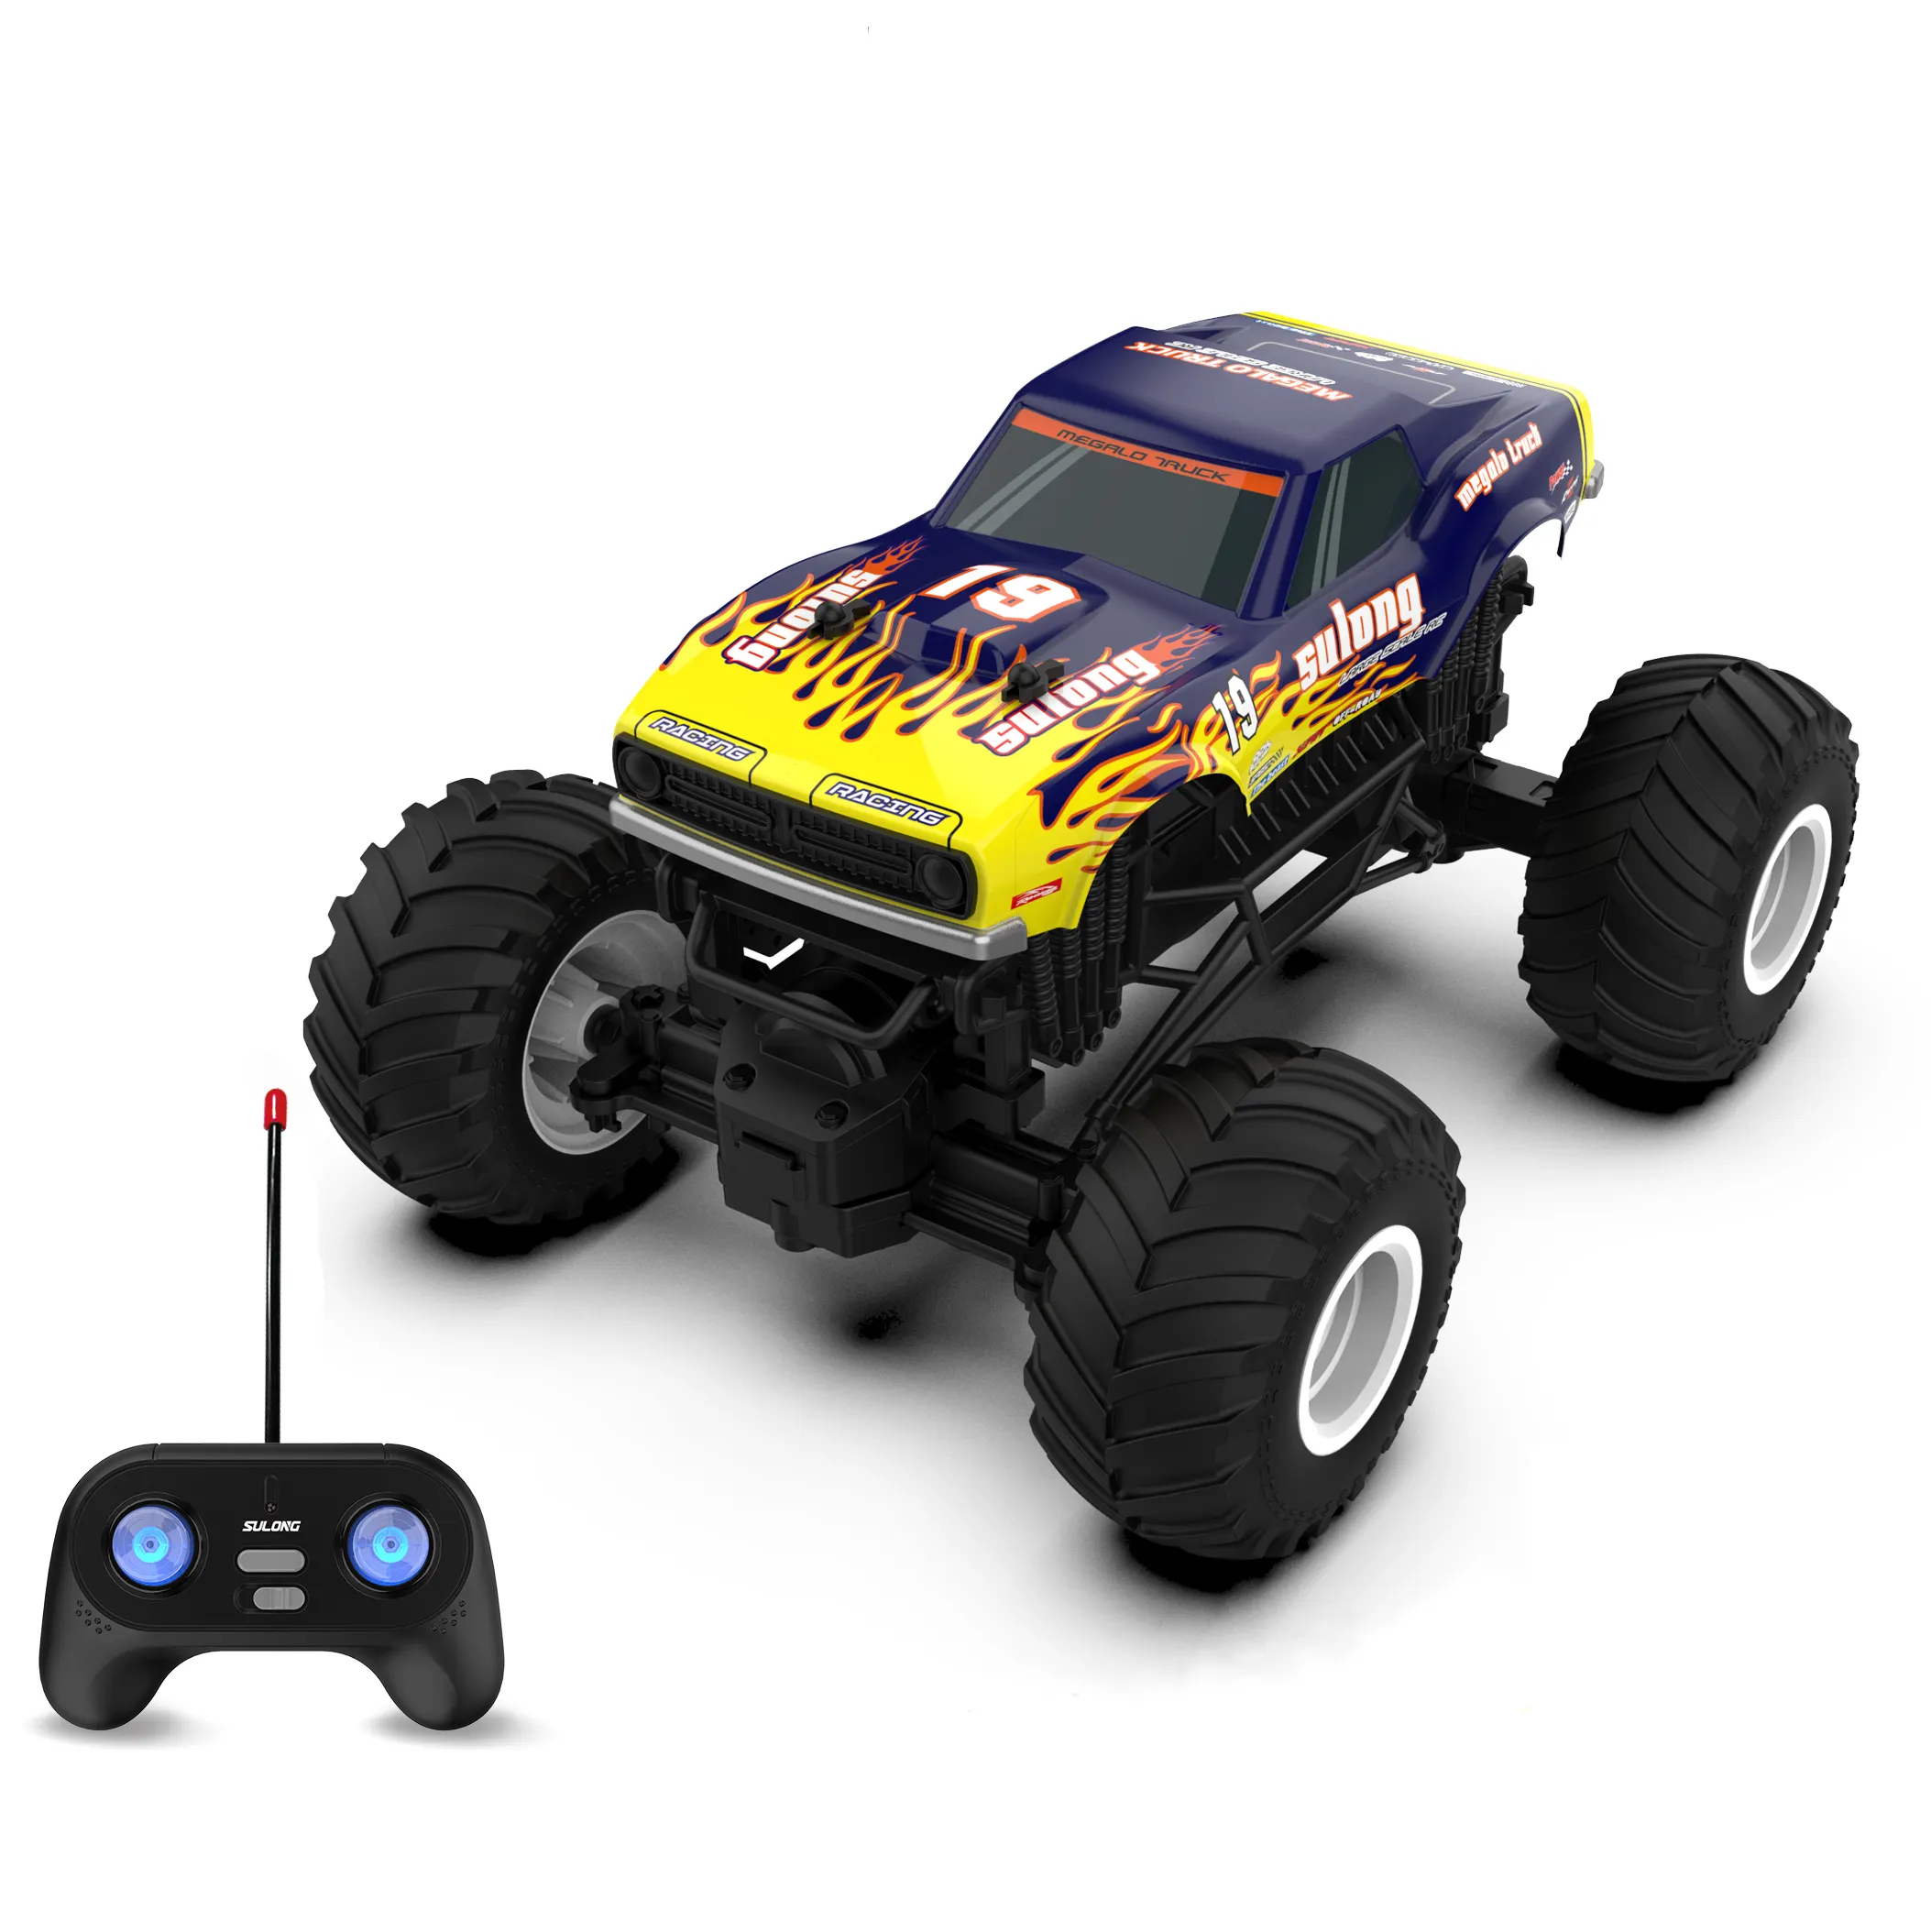 Hot Sell 1:14 Big 2WD RC Off-Road Climbing Truck Remote Control Car Toys